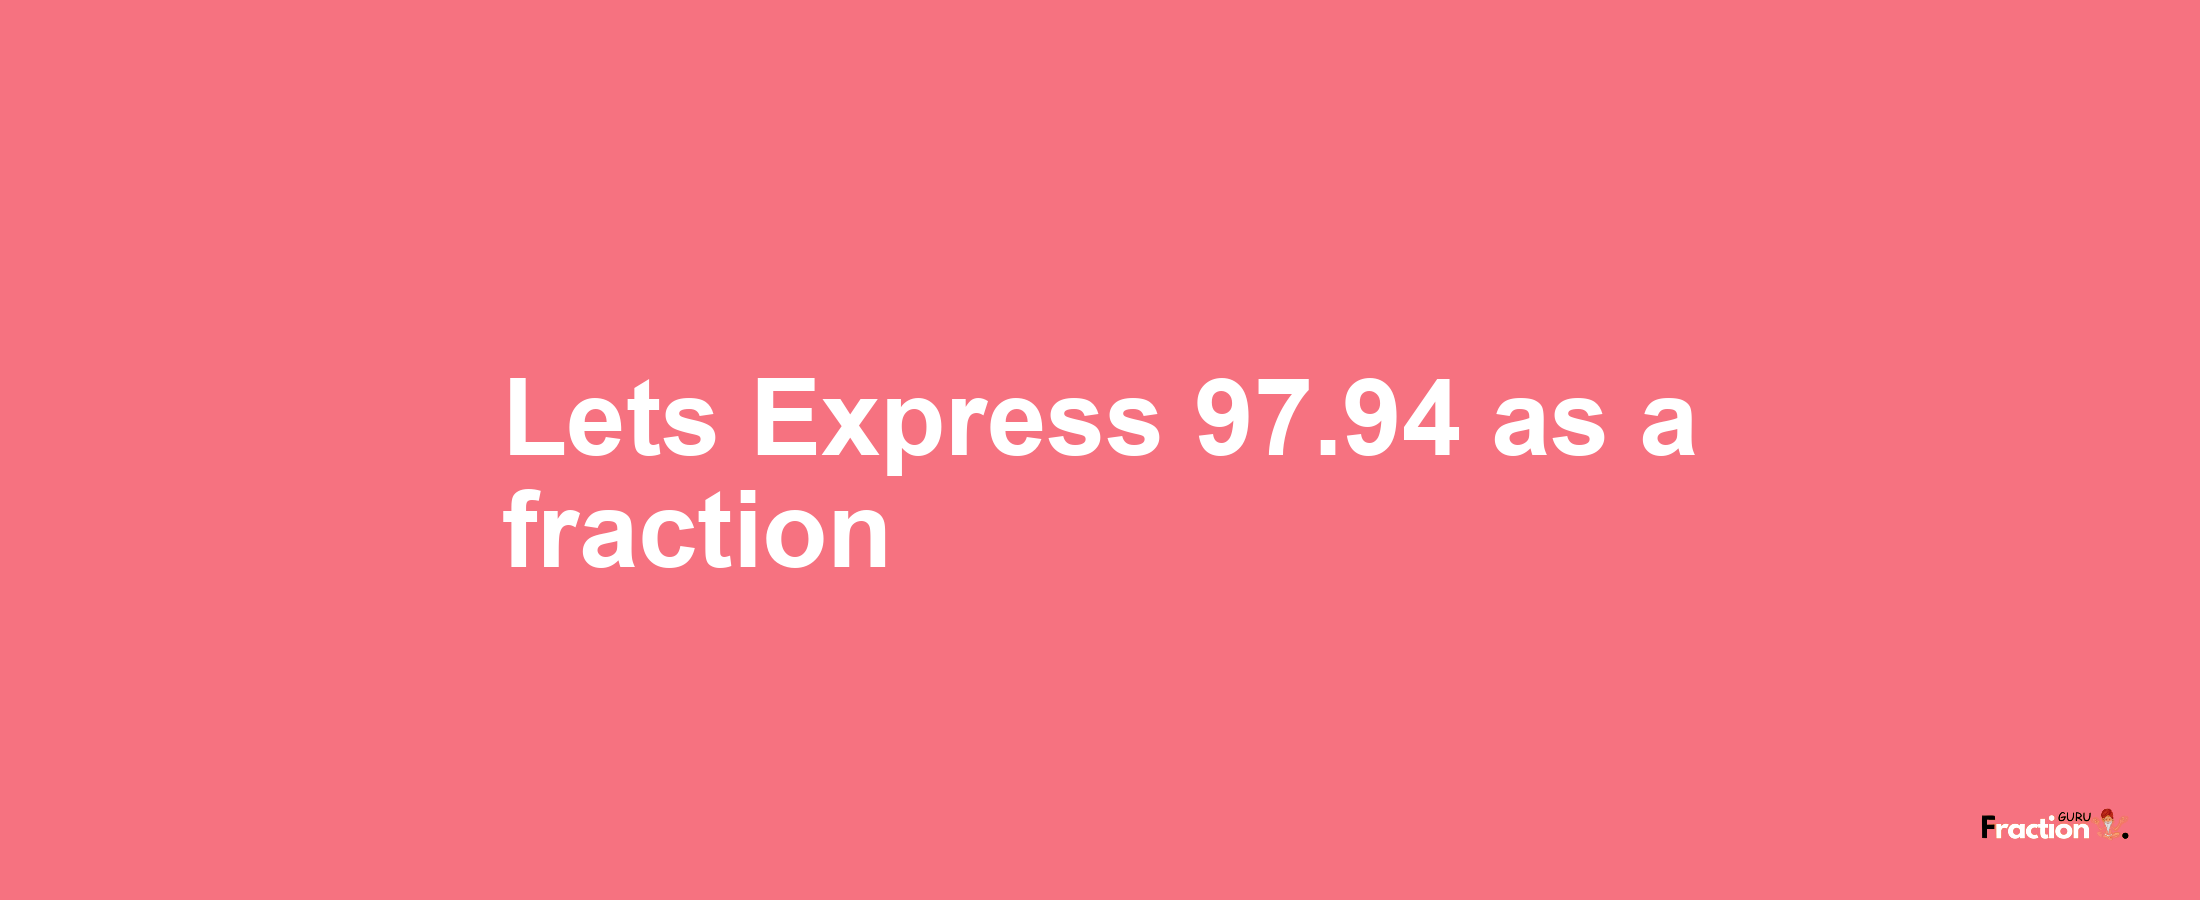 Lets Express 97.94 as afraction